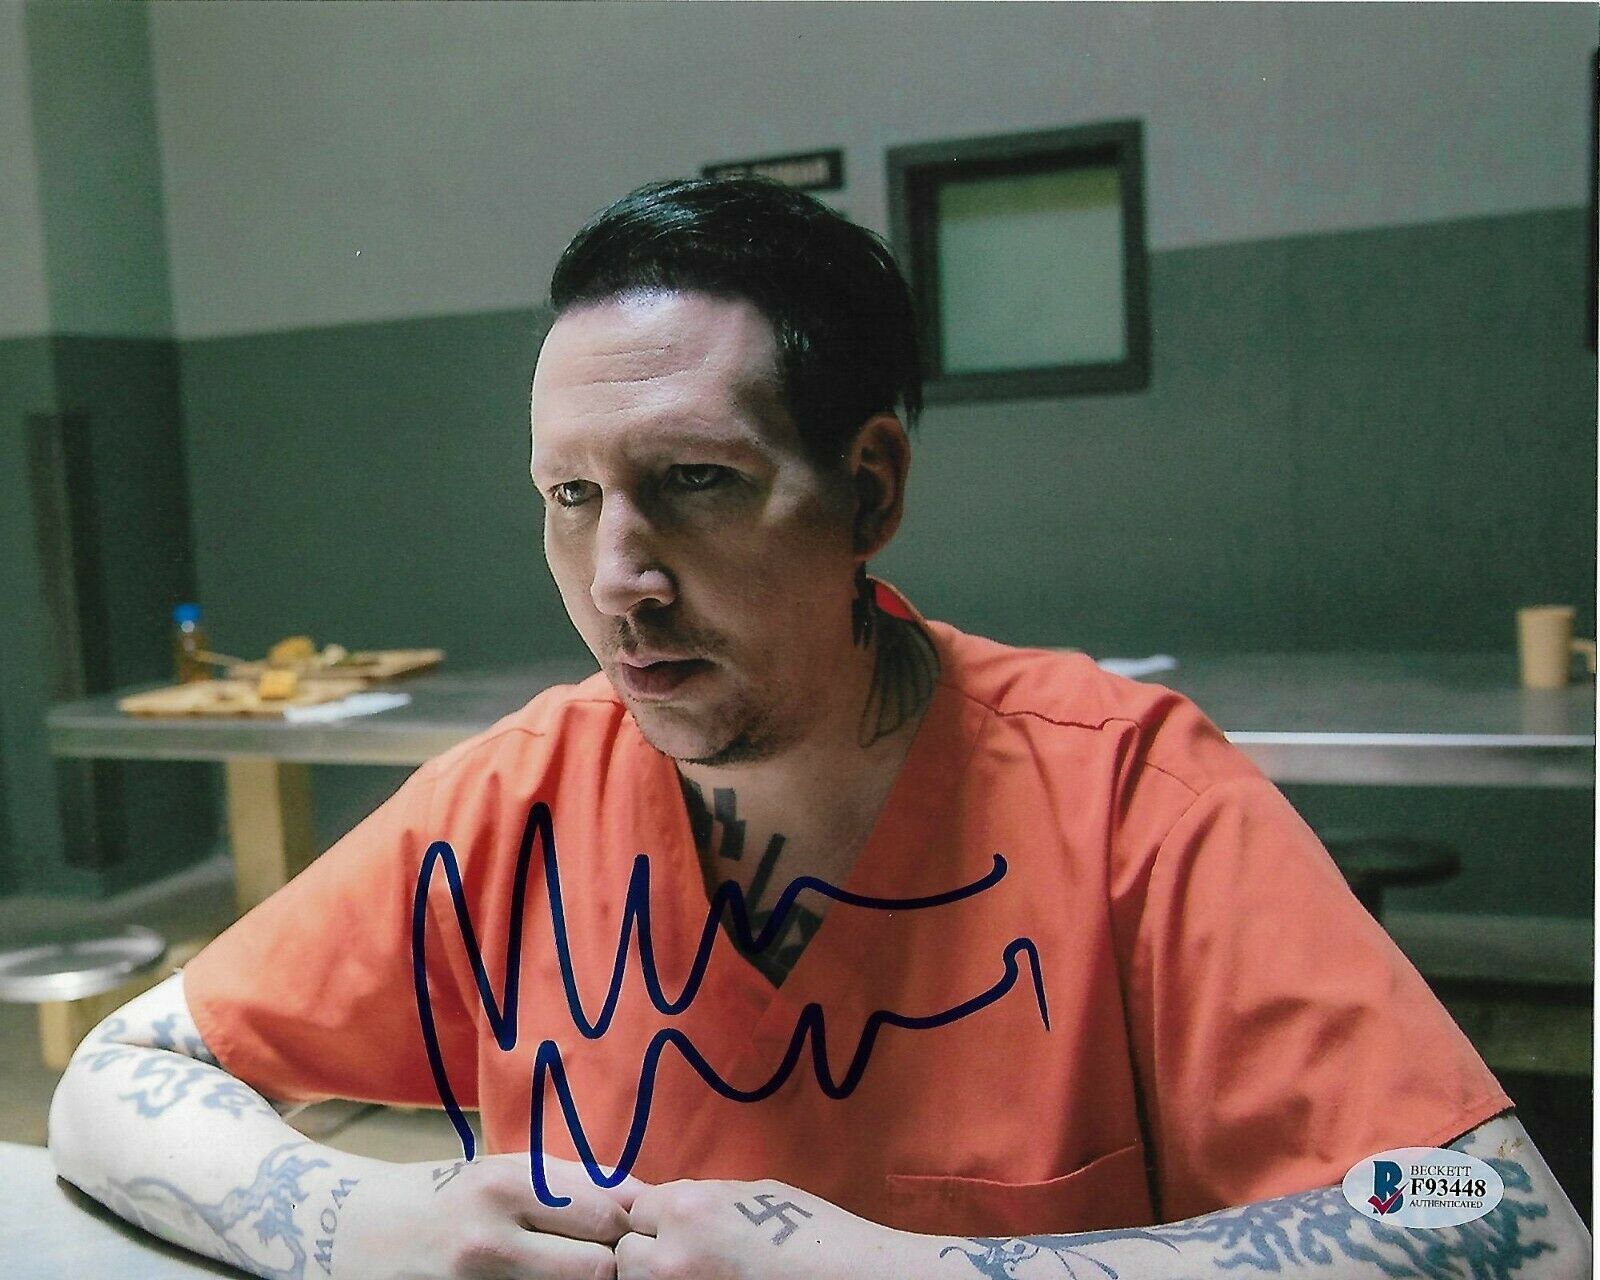 MARILYN MANSON AUTOGRAPHED SIGNED SONS OF ANARCHY SOA TULLY BAS COA 8X10 PHOTO  COLLECTIBLE MEMORABILIA